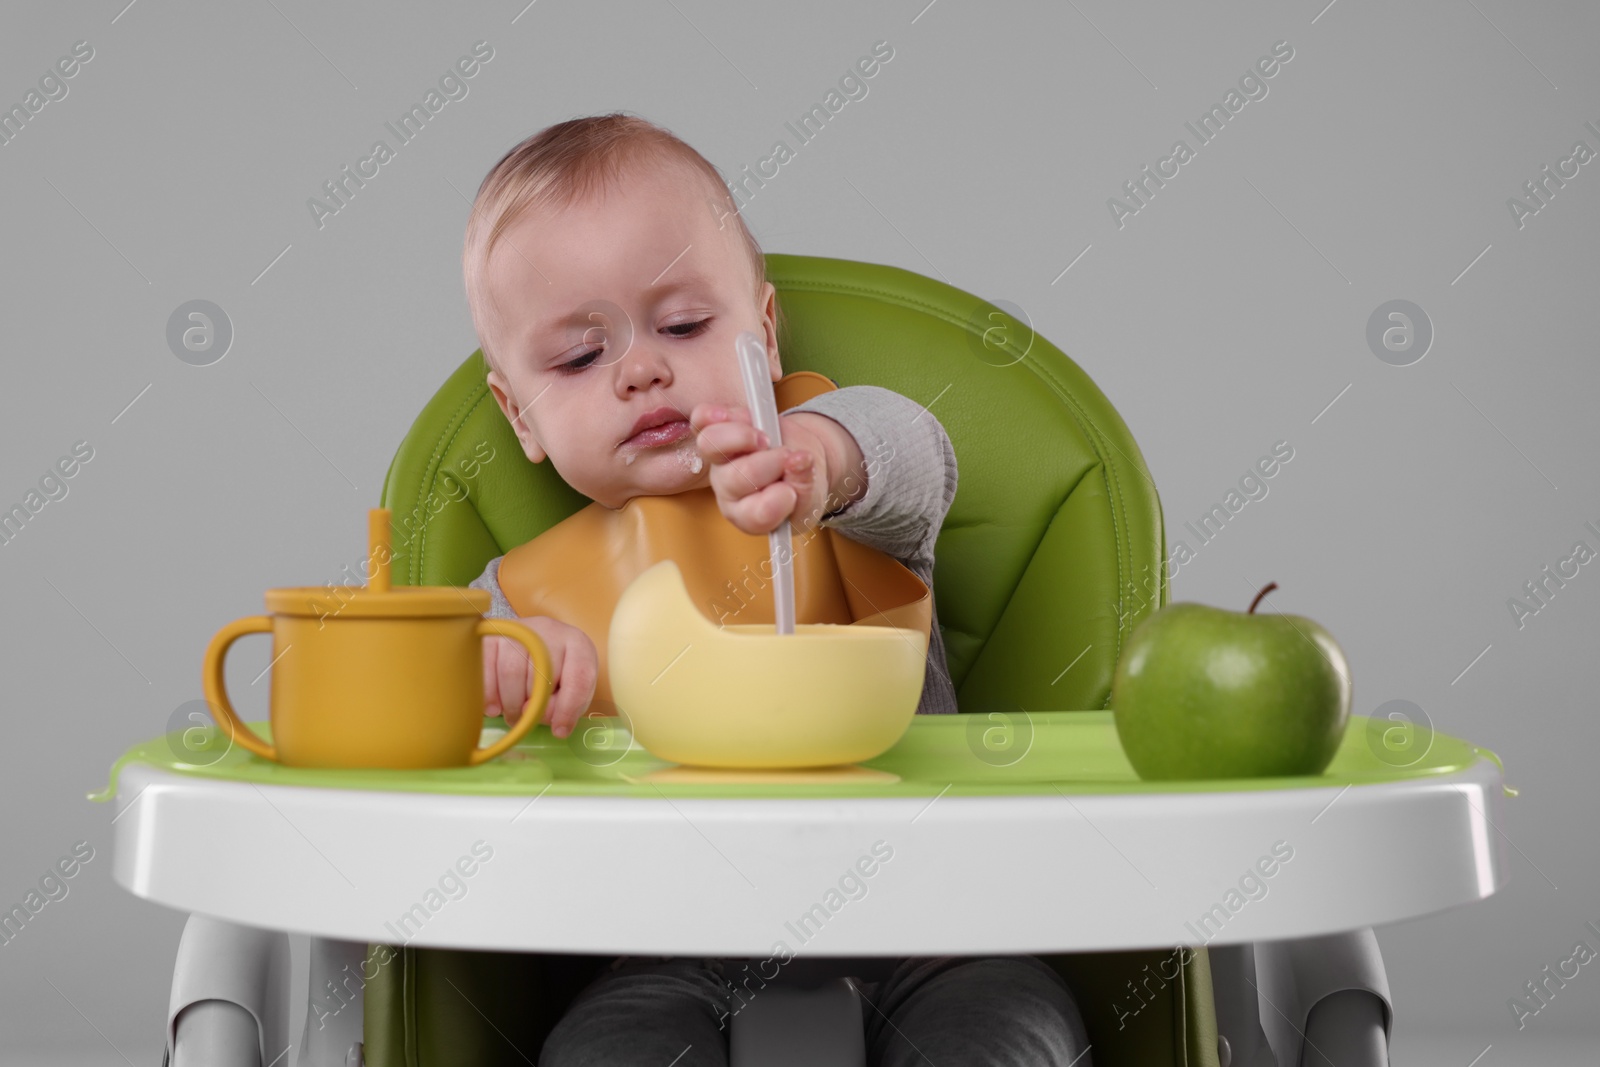 Photo of Cute little baby eating healthy food in high chair on gray background